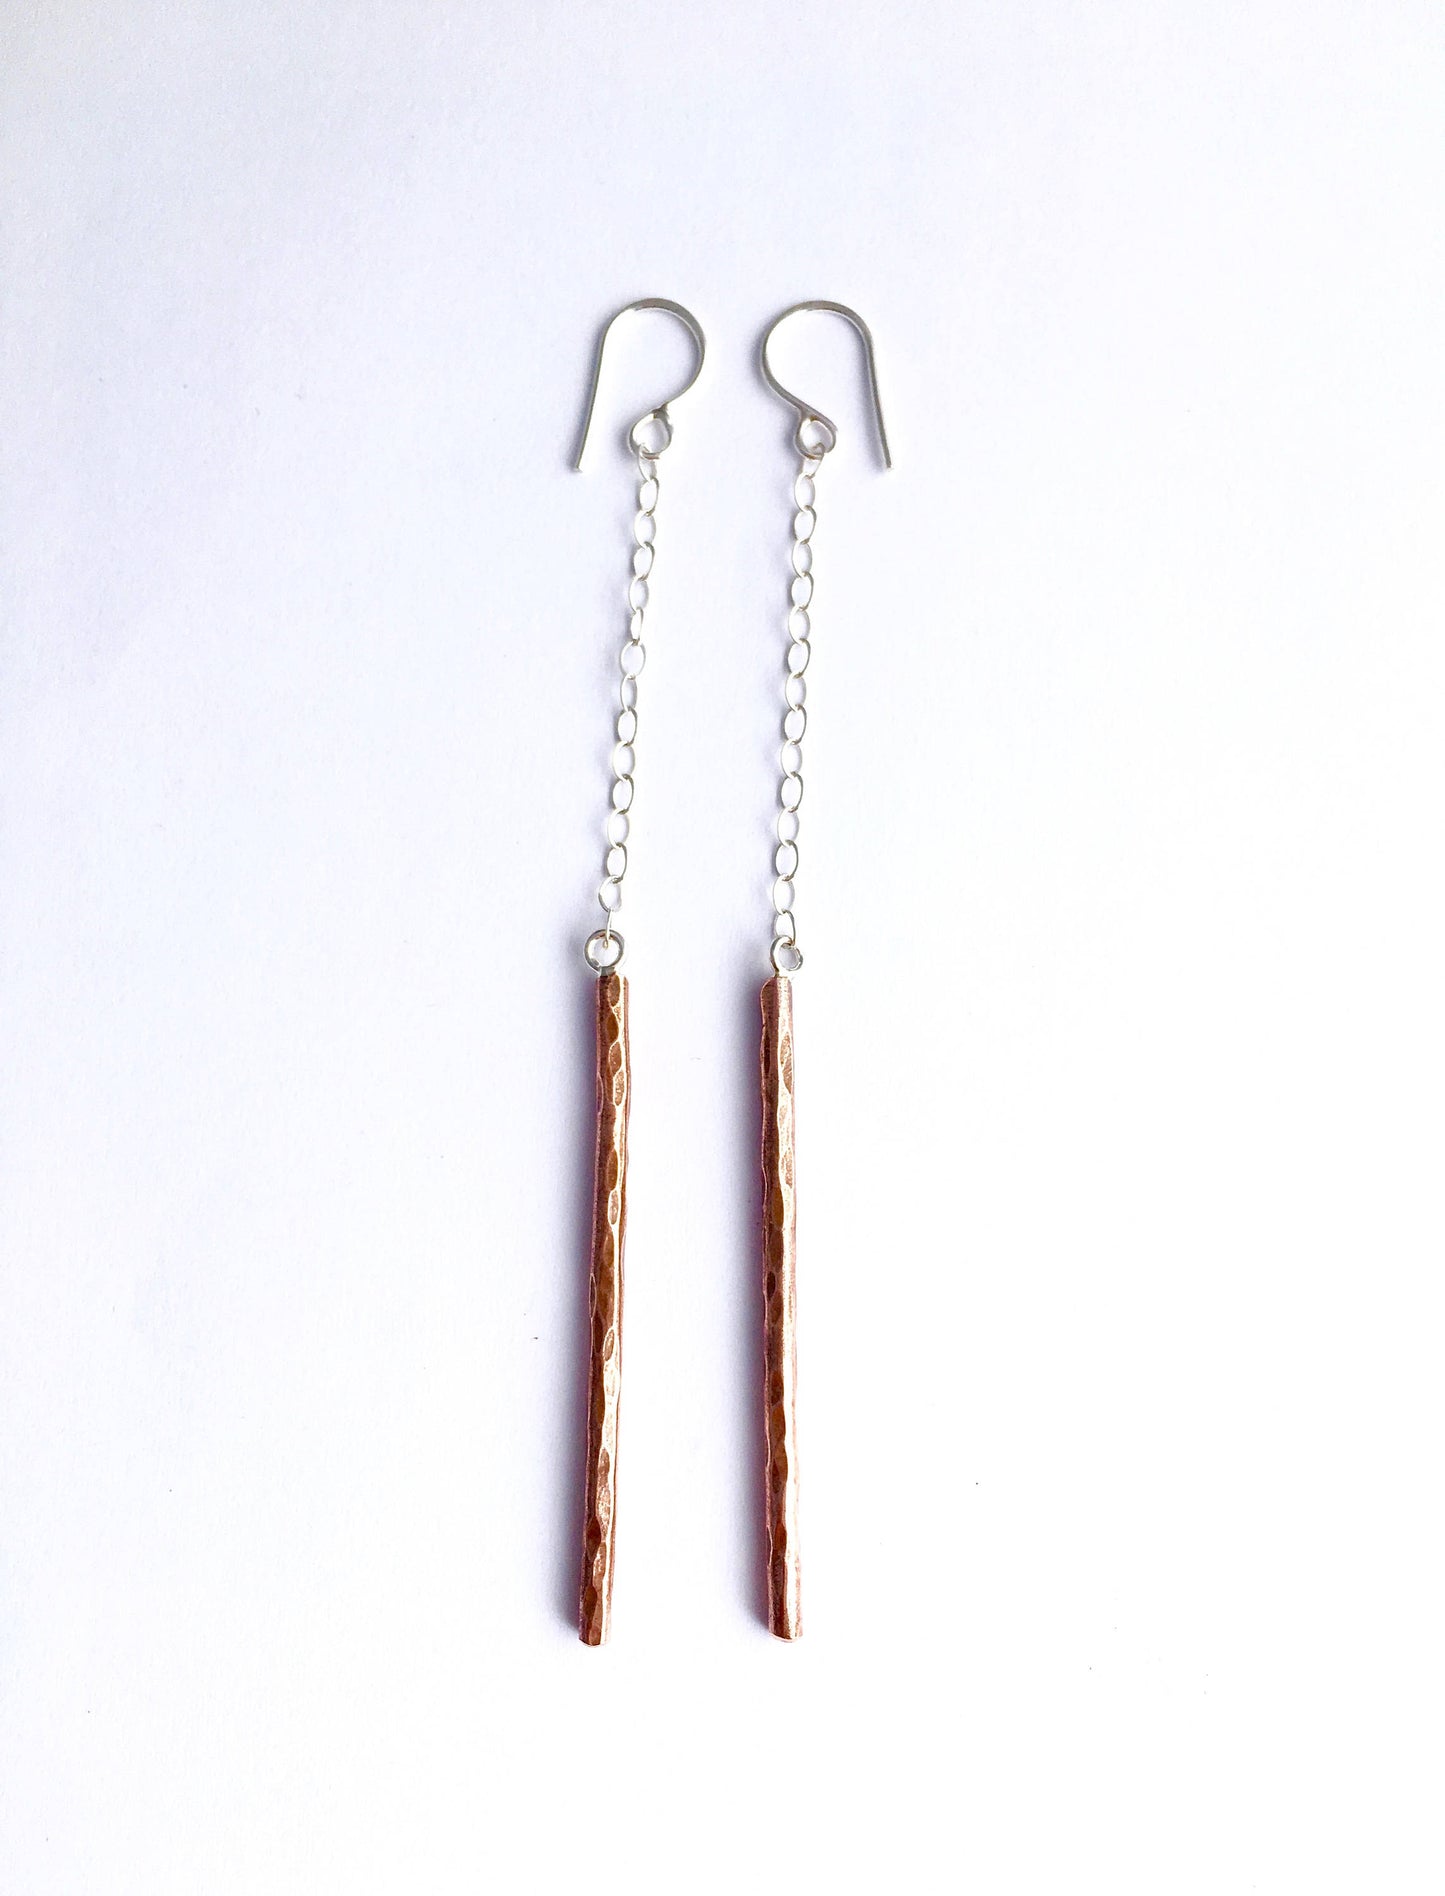 Balance Earrings in Copper and Sterling Silver